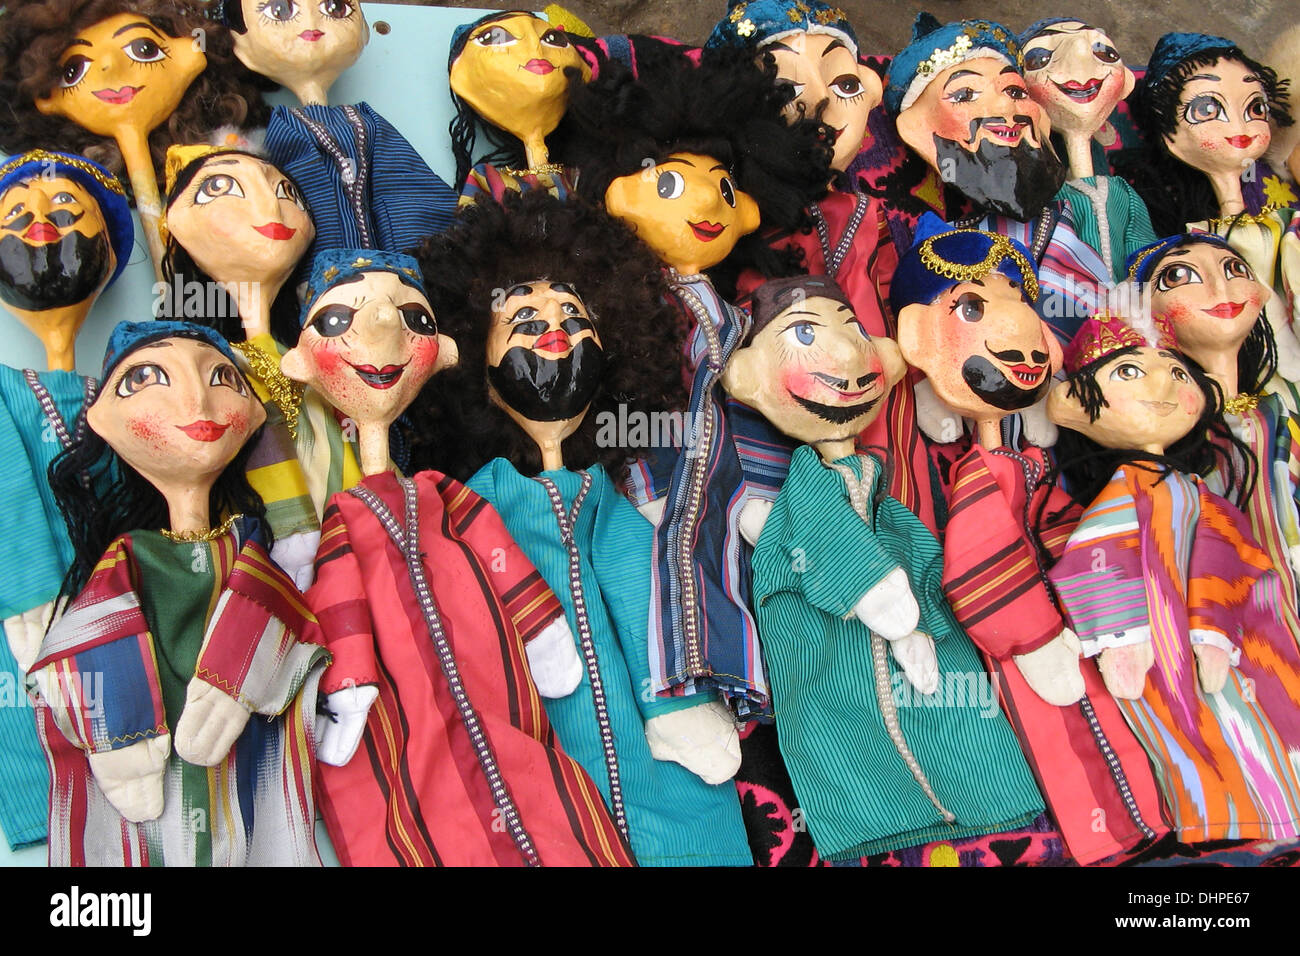 Puppets for sale on a stall in Samarkand, Uzbekistan Stock Photo